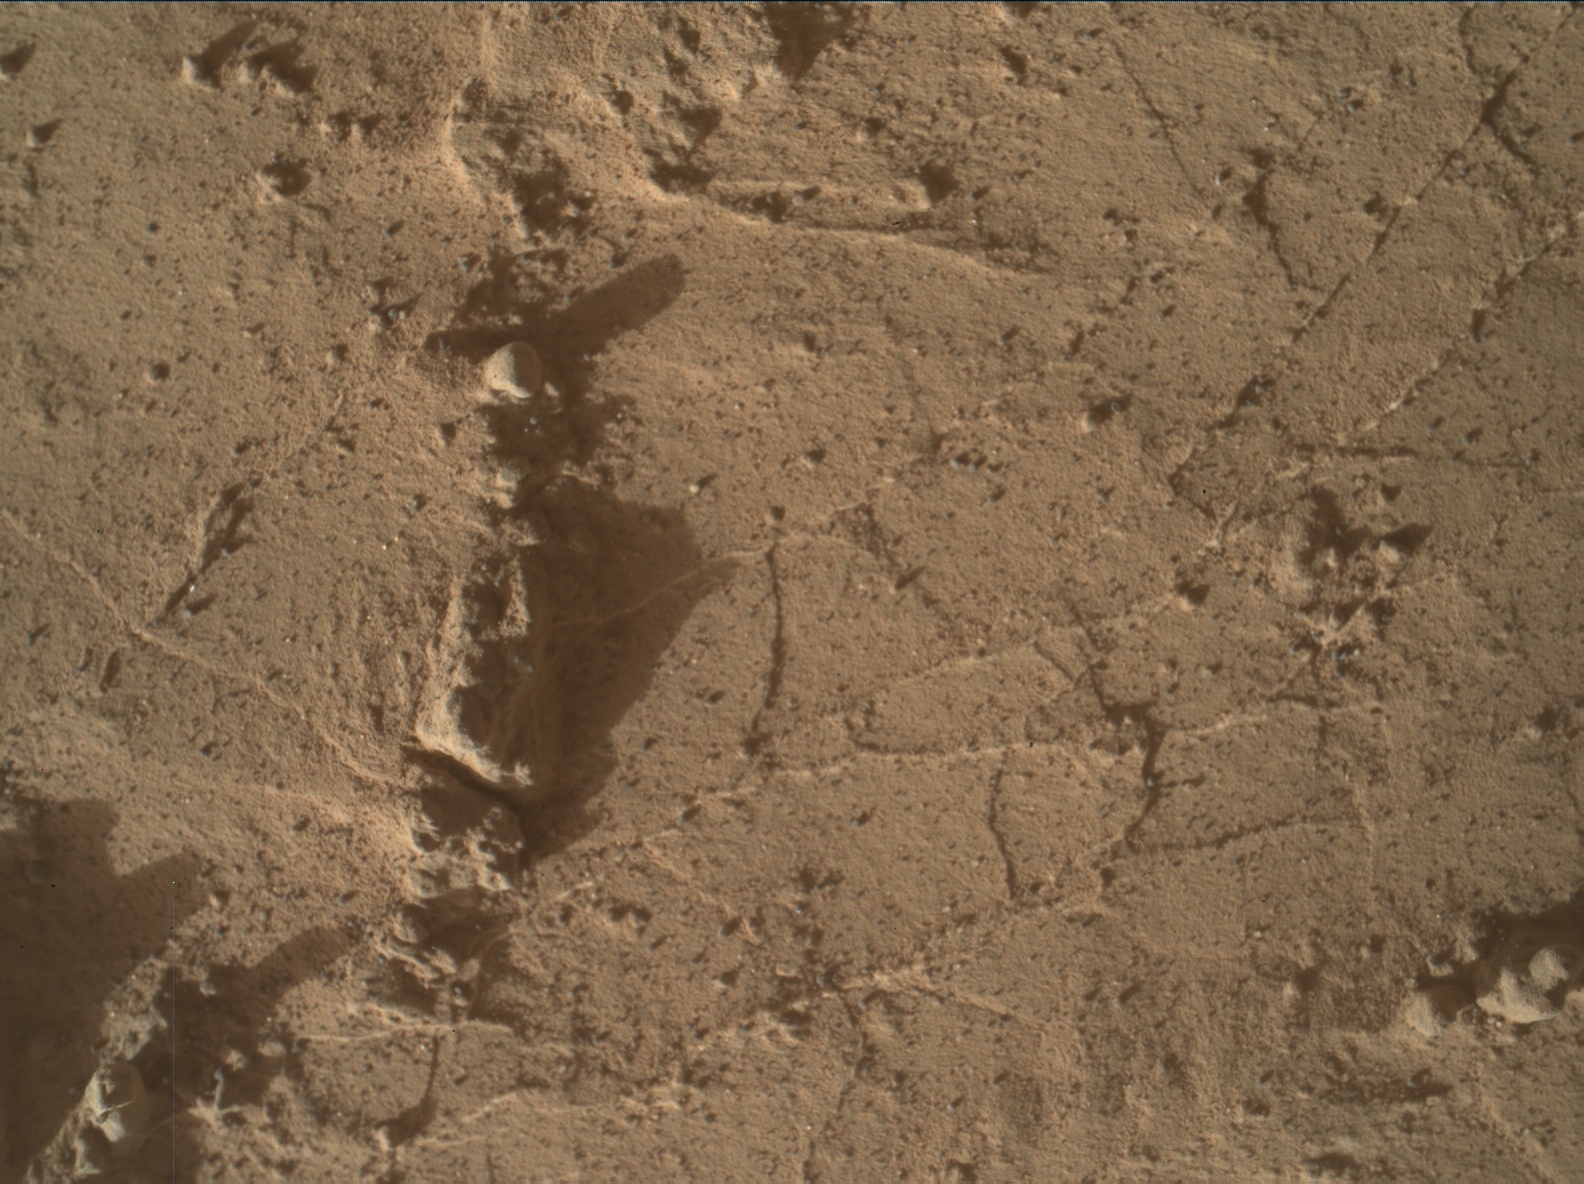 Nasa's Mars rover Curiosity acquired this image using its Mars Hand Lens Imager (MAHLI) on Sol 3139